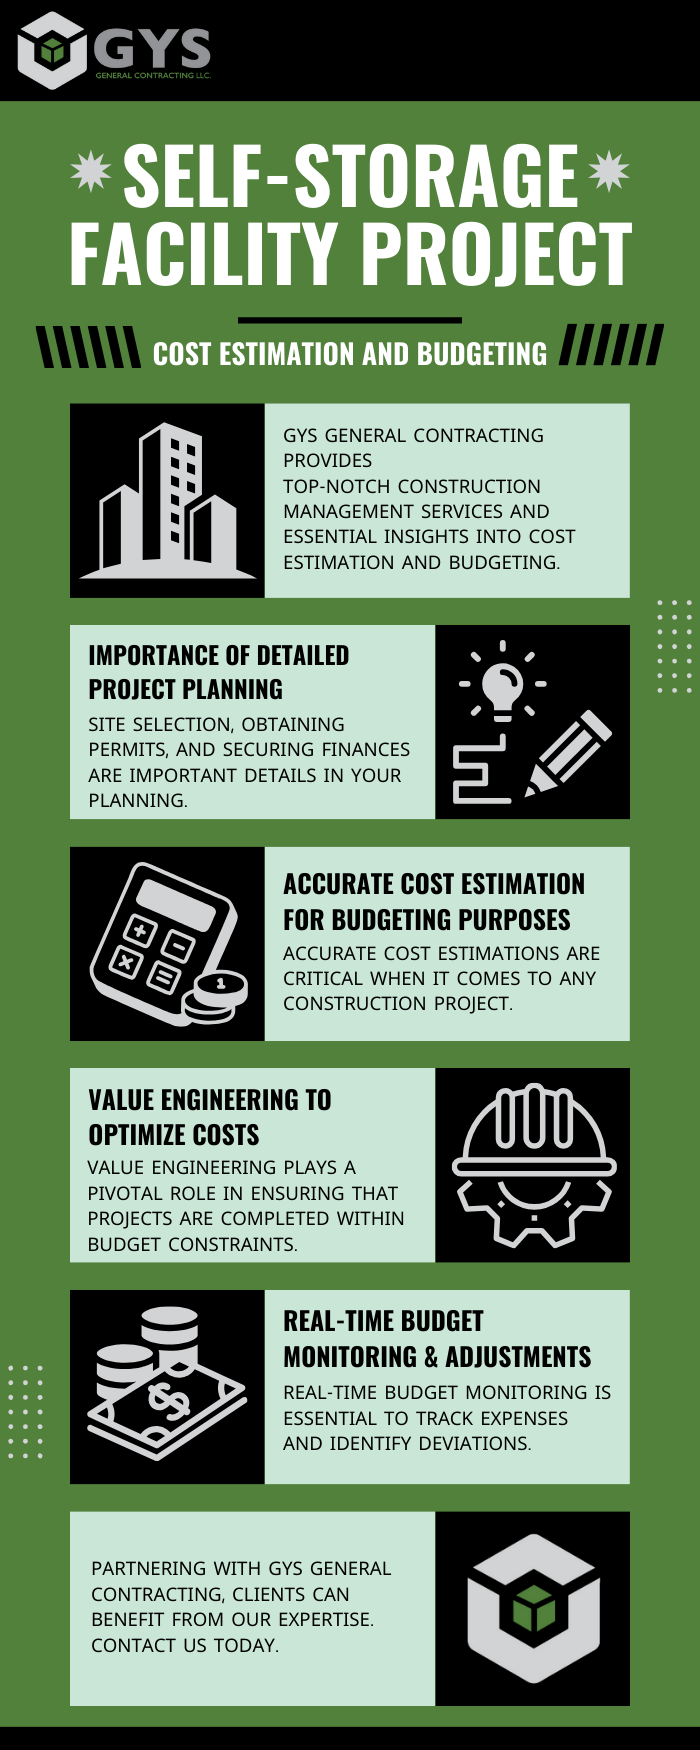 M40522 - infographic - Cost Estimation And Budgeting For Self-storage Facility Projects.png